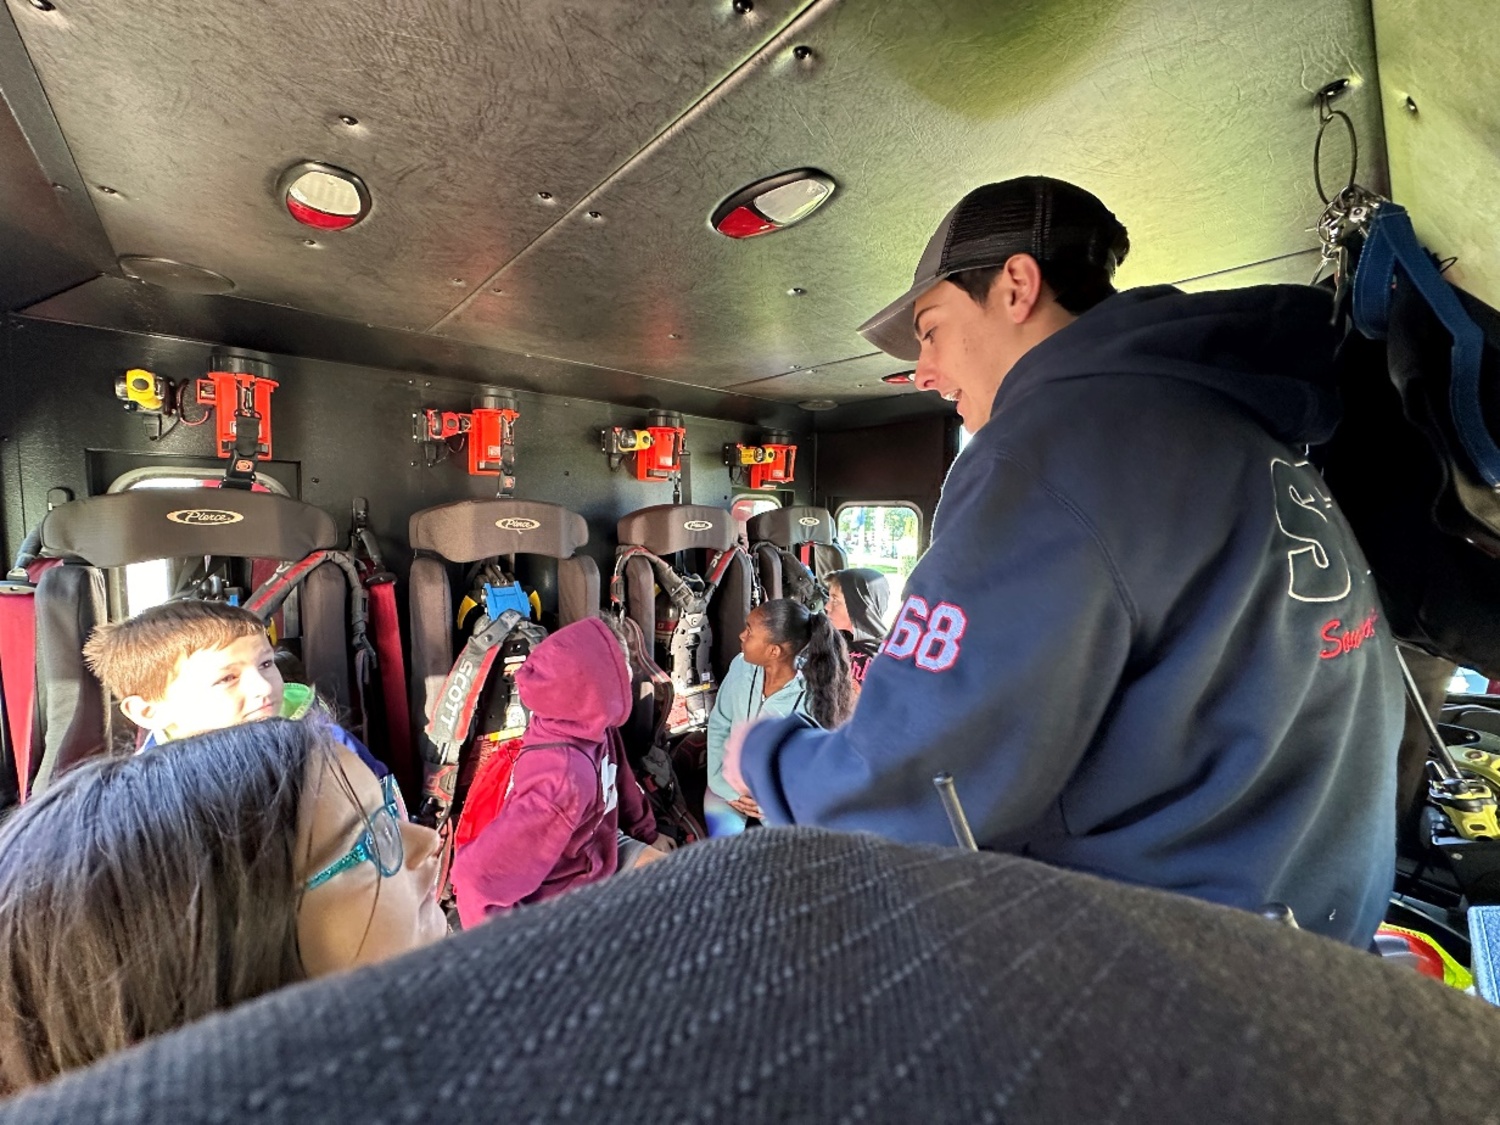 The Southampton Fire Department brought its
engines, ladder truck, and stump jumper to Tuckahoe School last week to teach the students about fire safety. Students saw the vehicles in action and learned how they are used during emergencies. A highlight of the visit was the simulated smokehouse. In this safe, controlled environment, fog is created to mimic the conditions of a real fire. Students crawled through the smokehouse under the watchful eyes of the firefighters. The experience taught the students what to do if they ever find themselves in a smoke-filled room. COURTESY TUCKAHOE SCHOOL DISTRICT